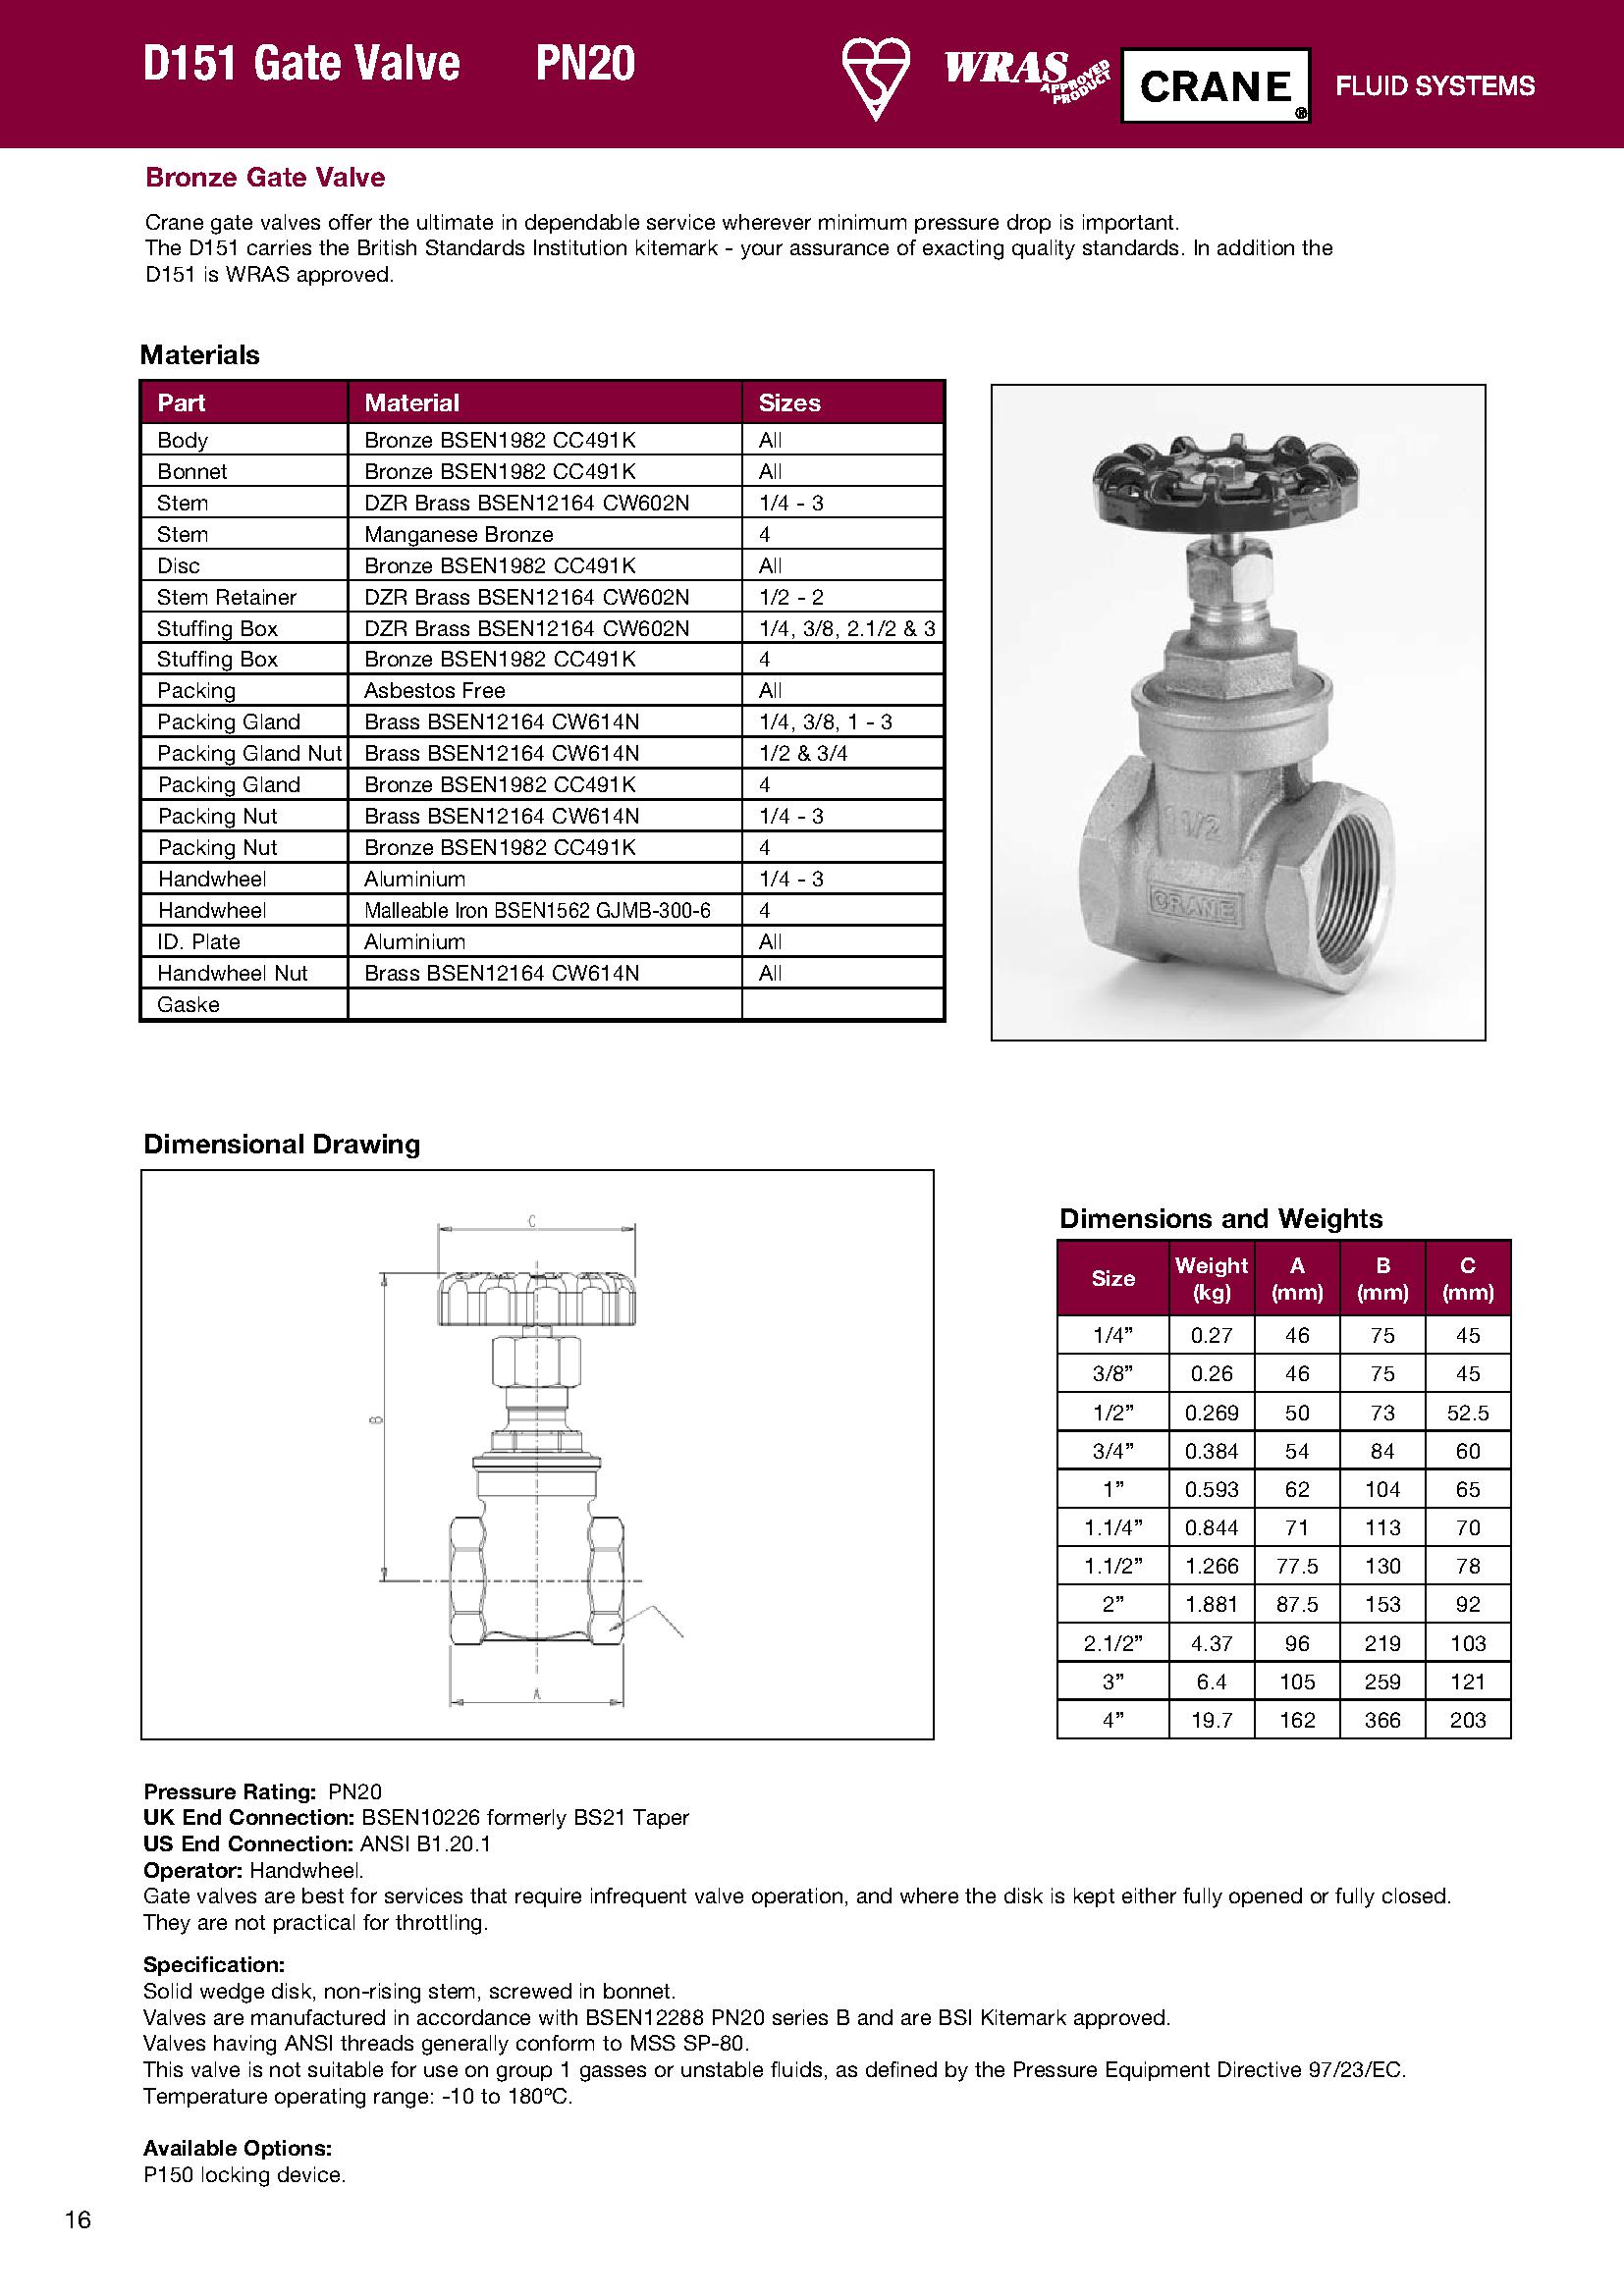 valves and fittings pdf